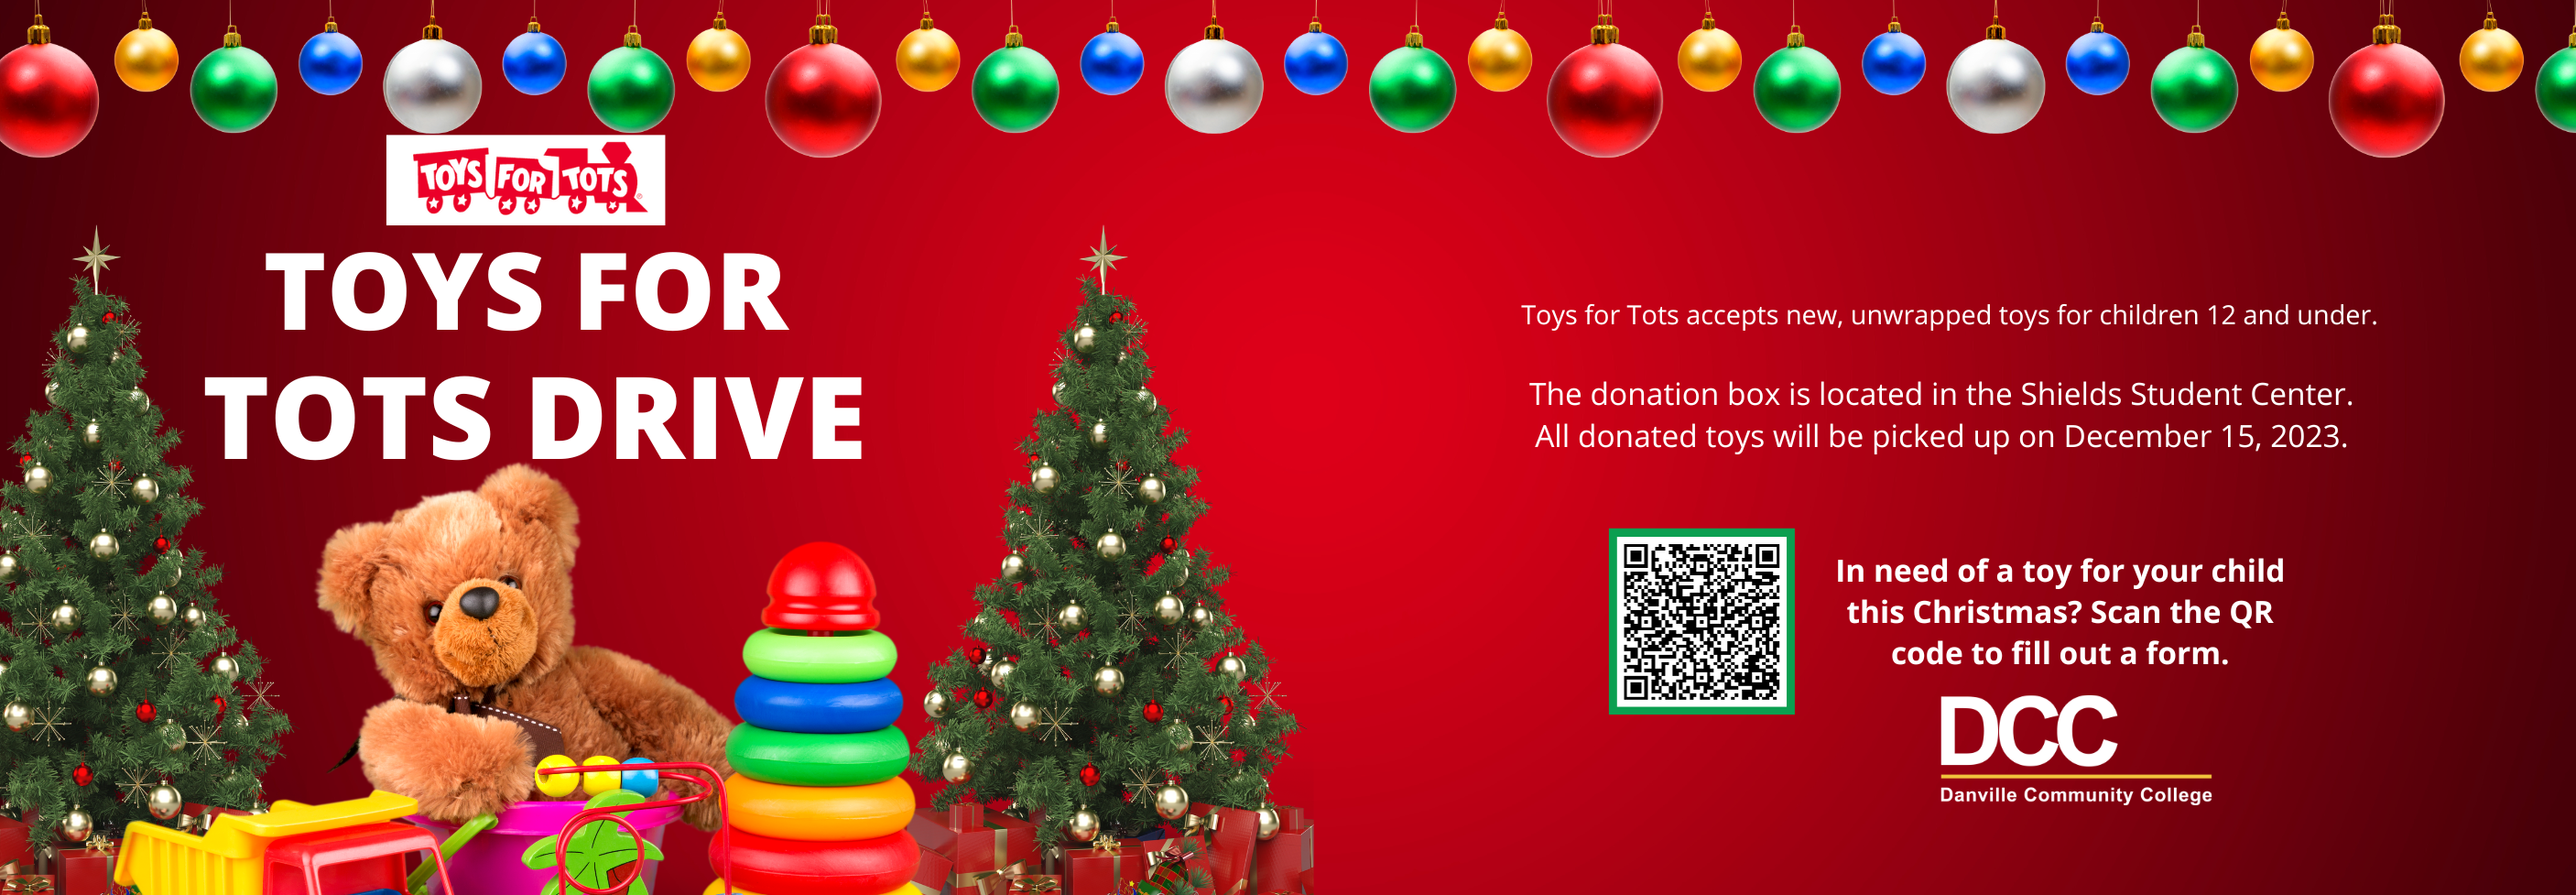 Toys for Tots Drive 